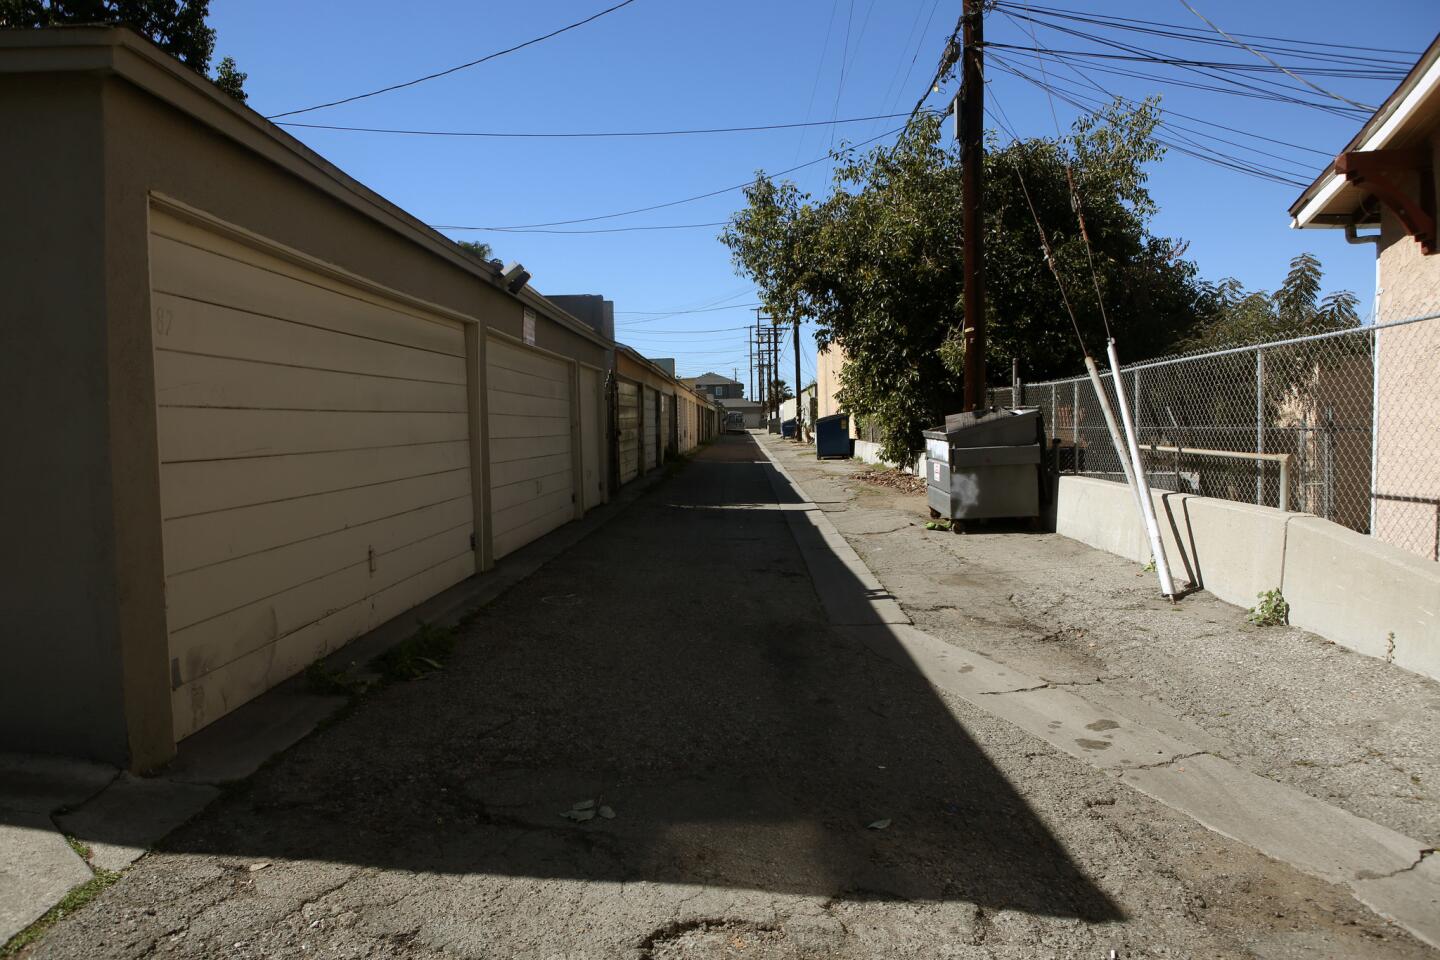 Alley off 10th Avenue